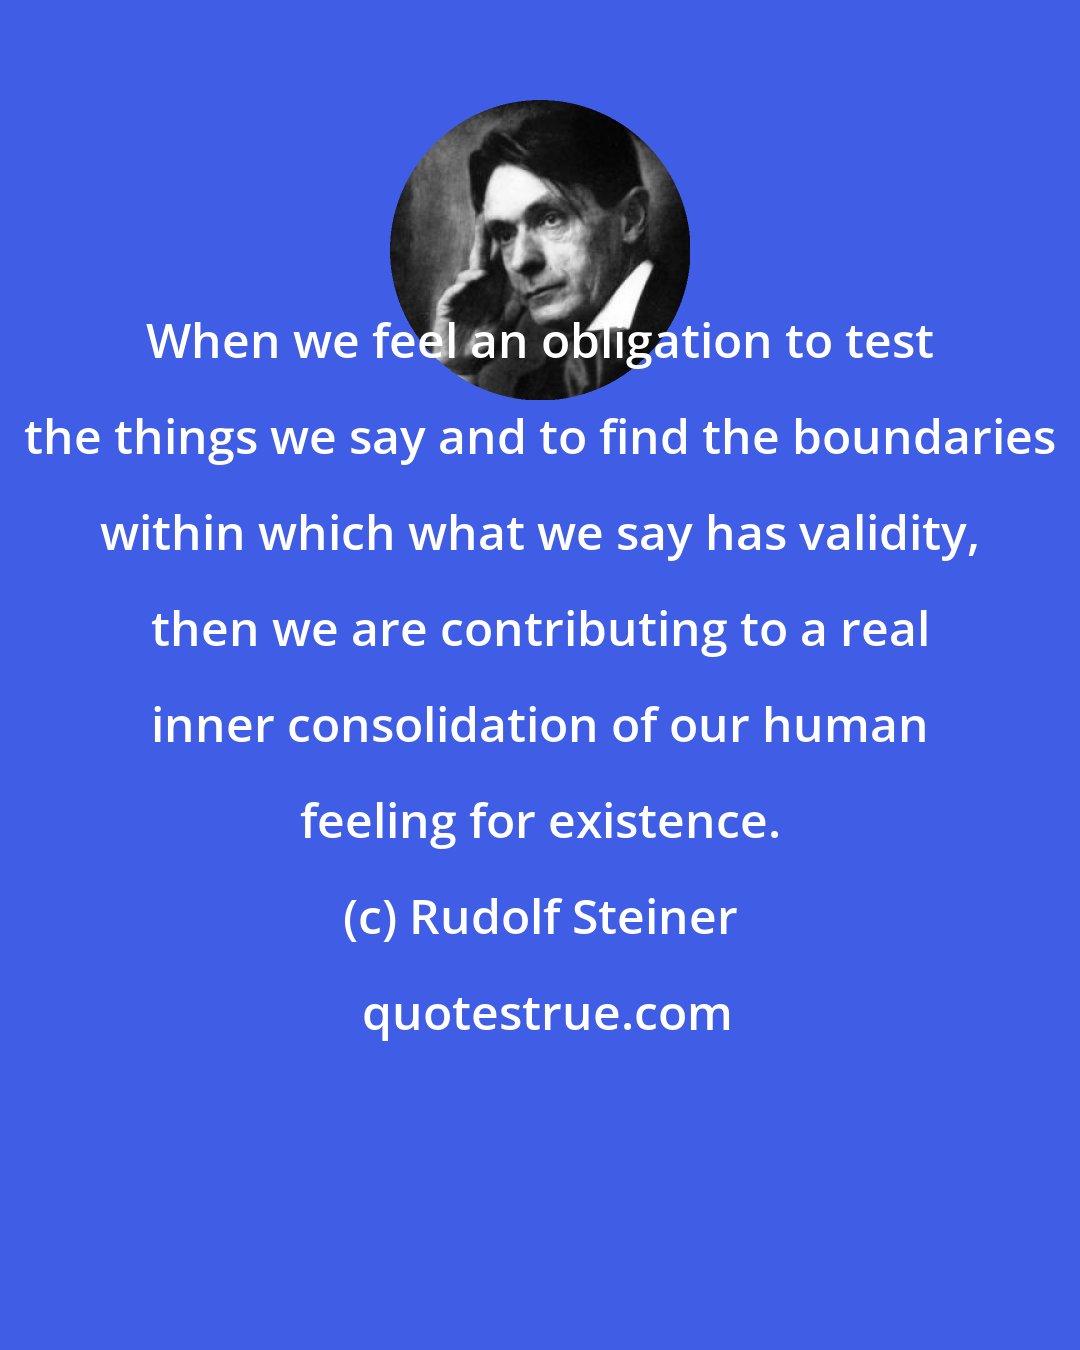 Rudolf Steiner: When we feel an obligation to test the things we say and to find the boundaries within which what we say has validity, then we are contributing to a real inner consolidation of our human feeling for existence.